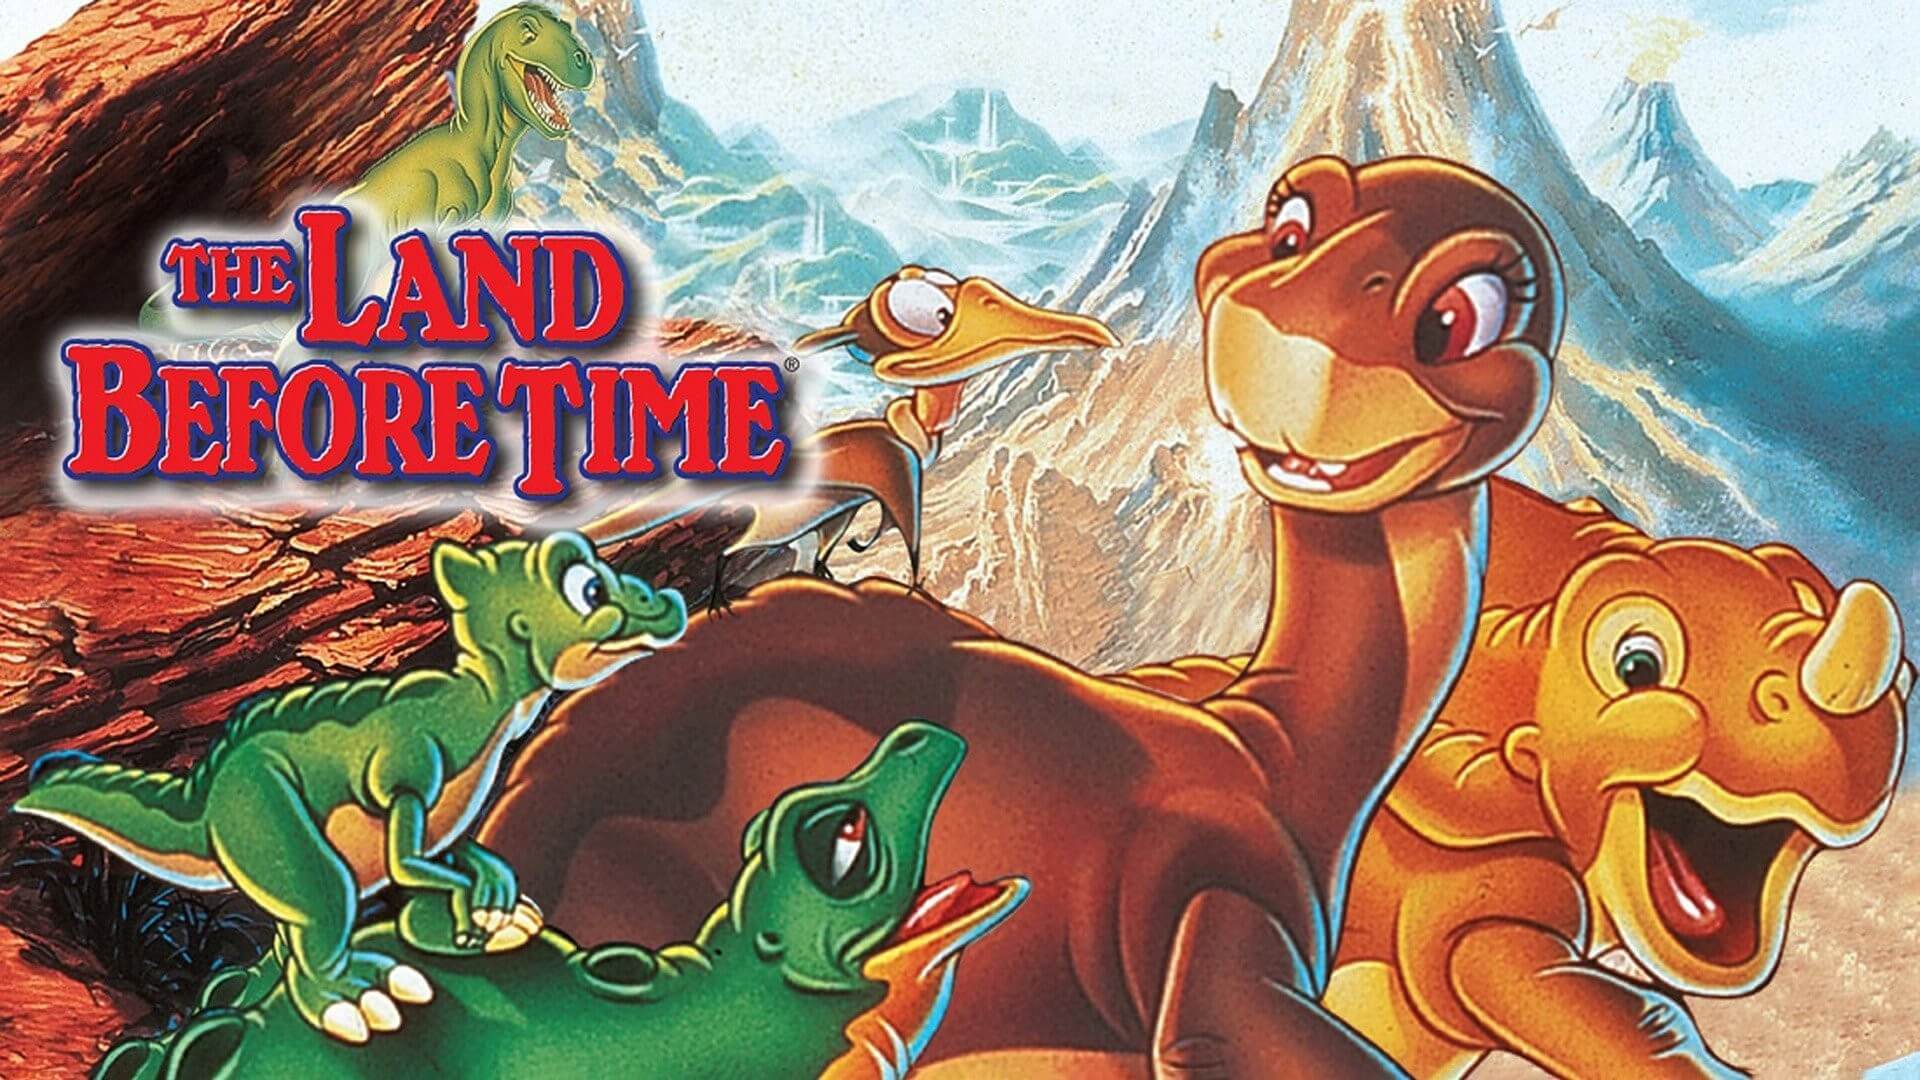 title poster for The Land Before Time